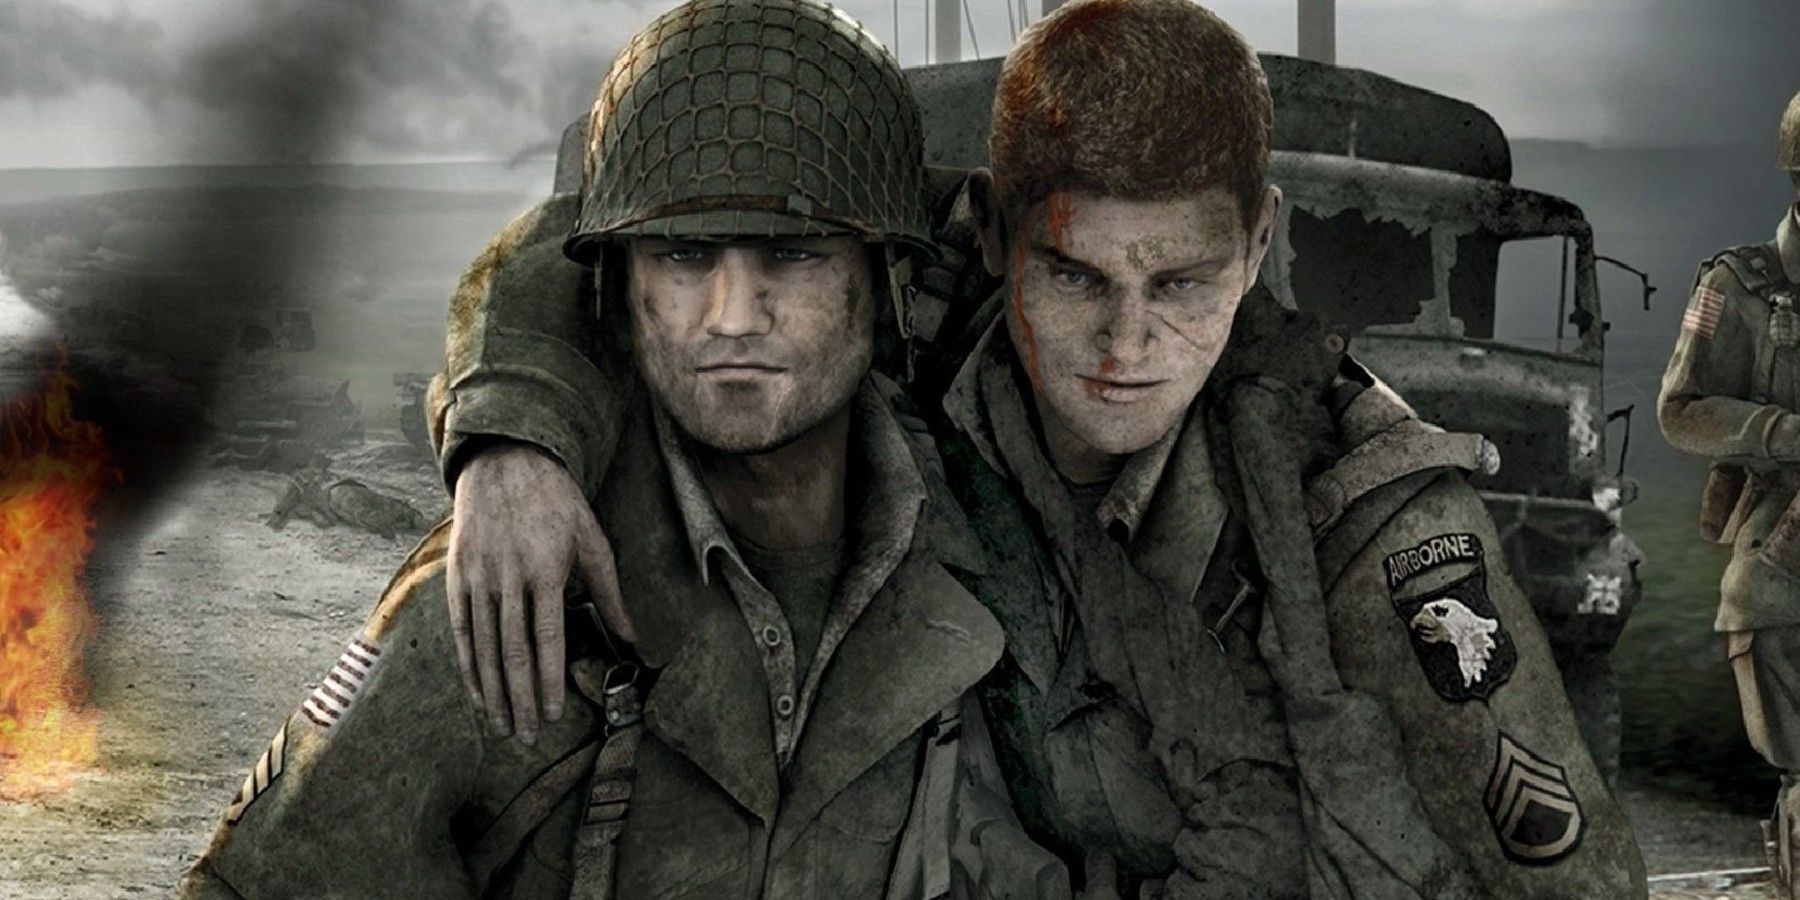 A New Brothers in Arms Game Was Announced Months Ago and No One Noticed